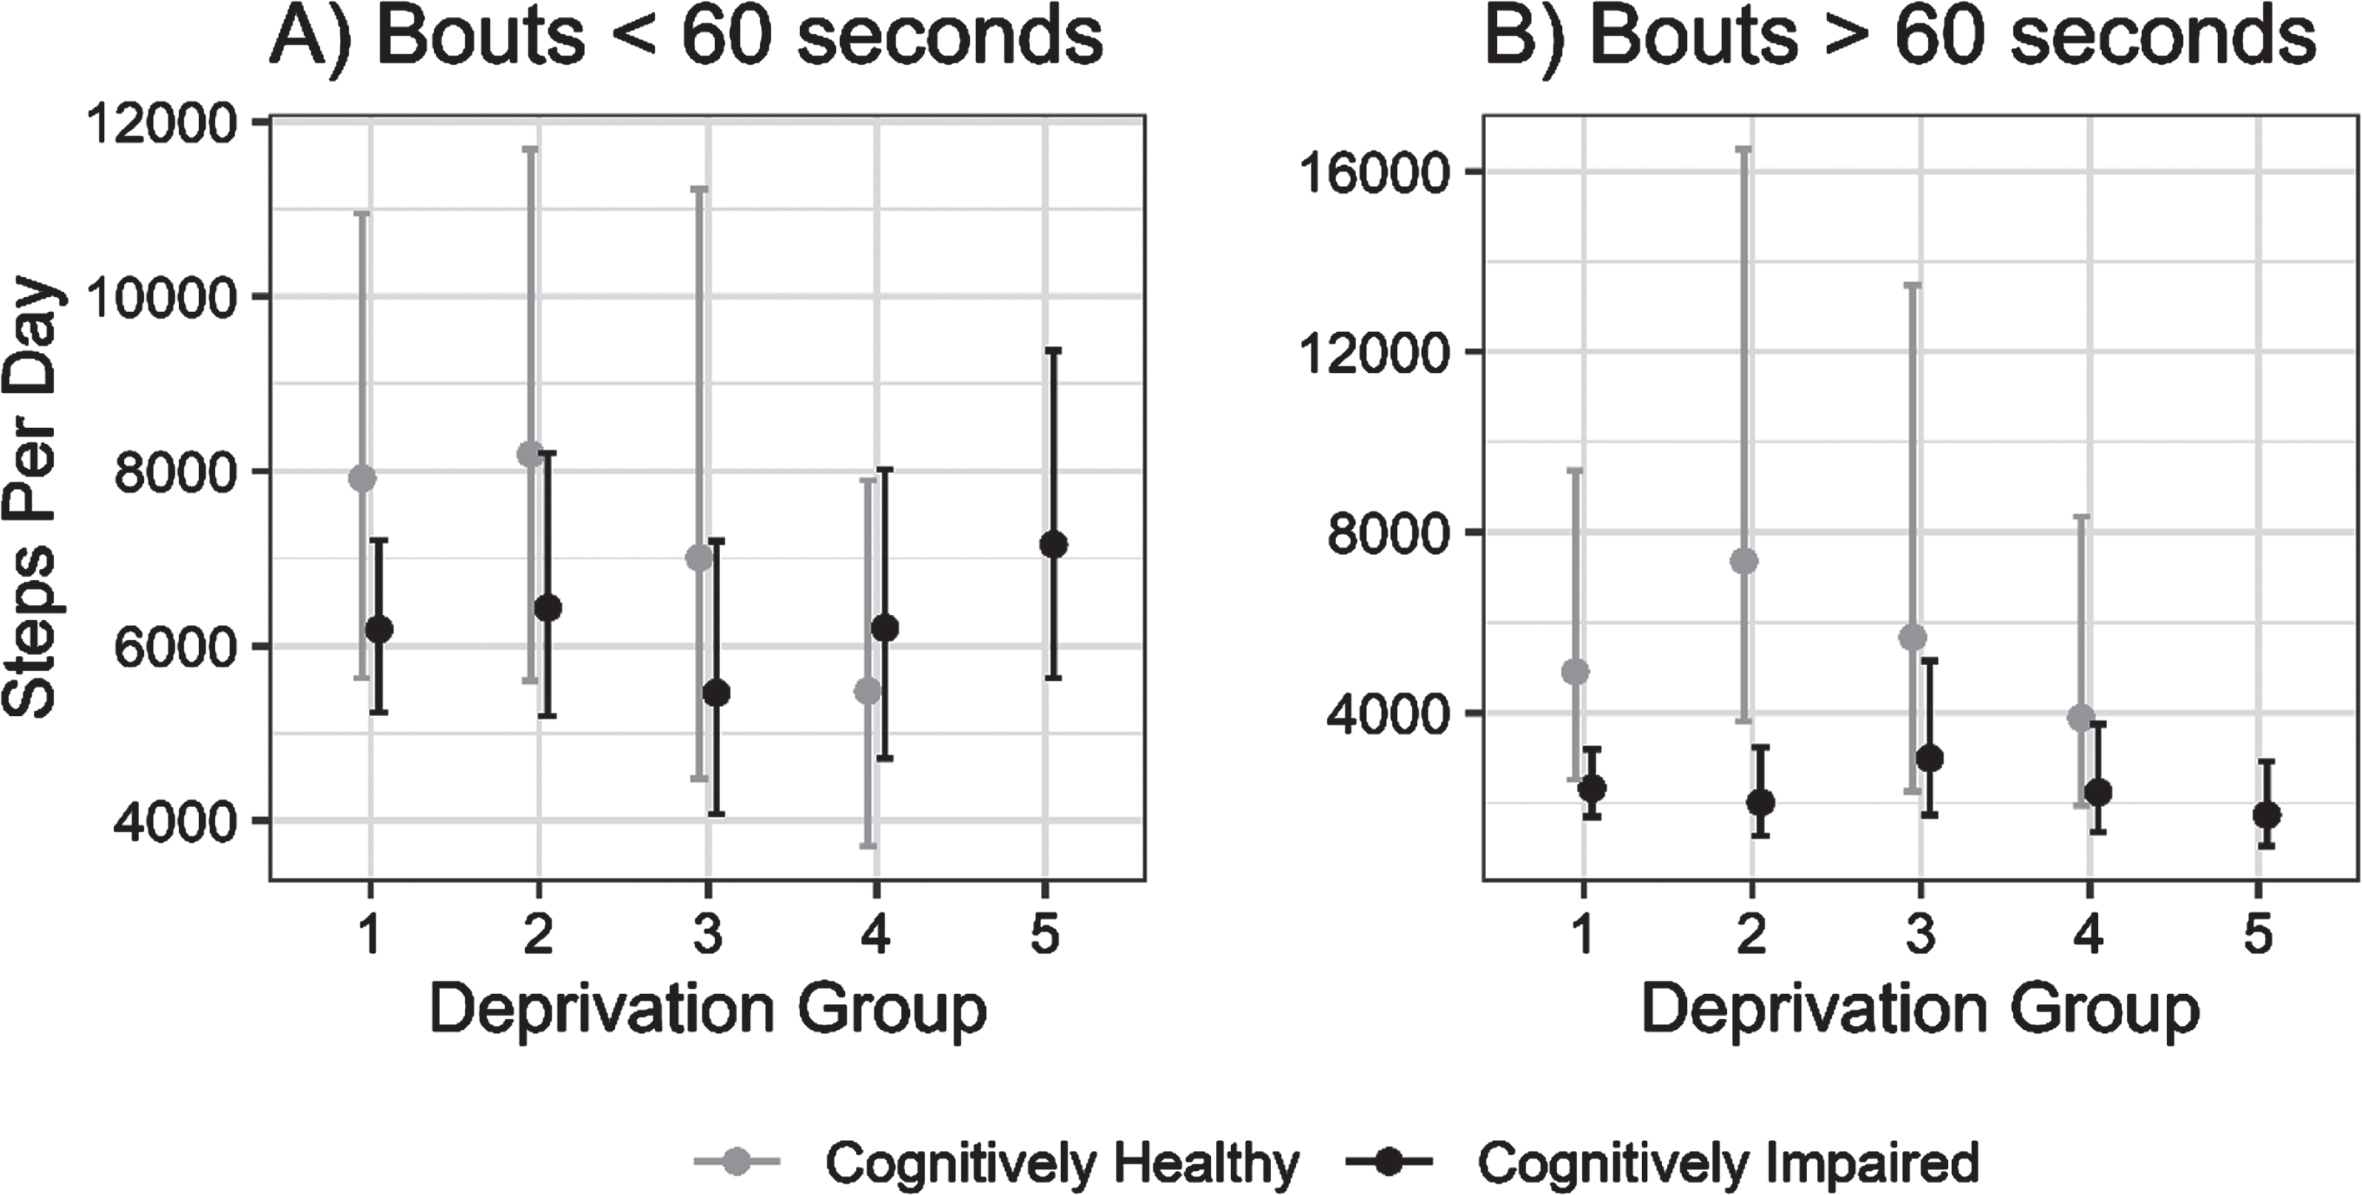 Estimated daily step counts (±95% CI) for cognitively impaired and cognitively unimpaired groups across deprivation fifths from 1 (least deprived) to 5 (most deprived) in ambulatory walking bouts under 60 s (A) and over 60 s (B).